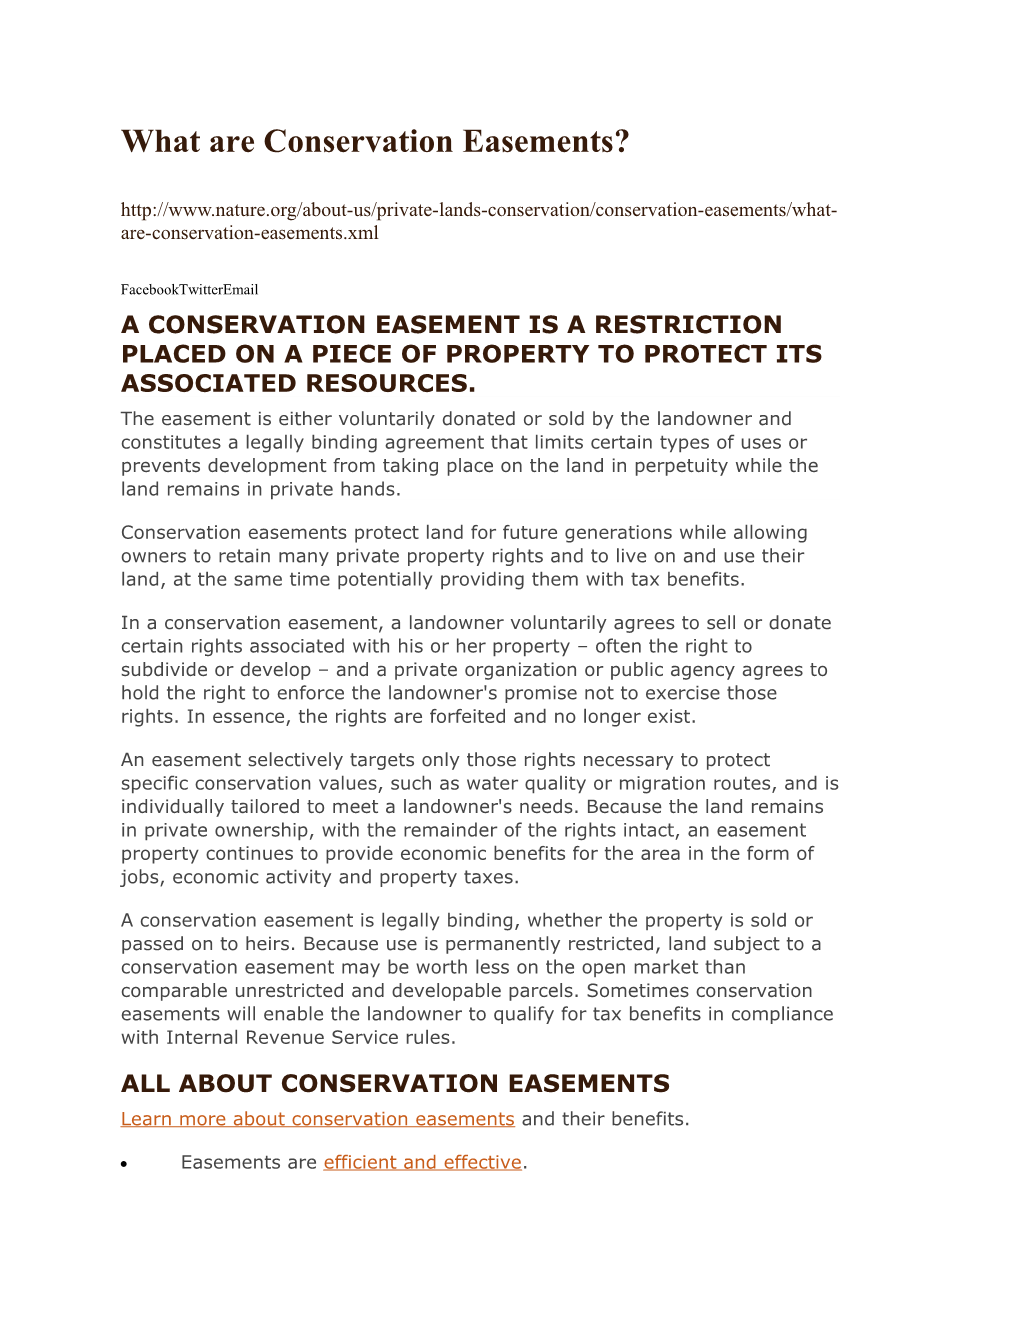 What Are Conservation Easements?